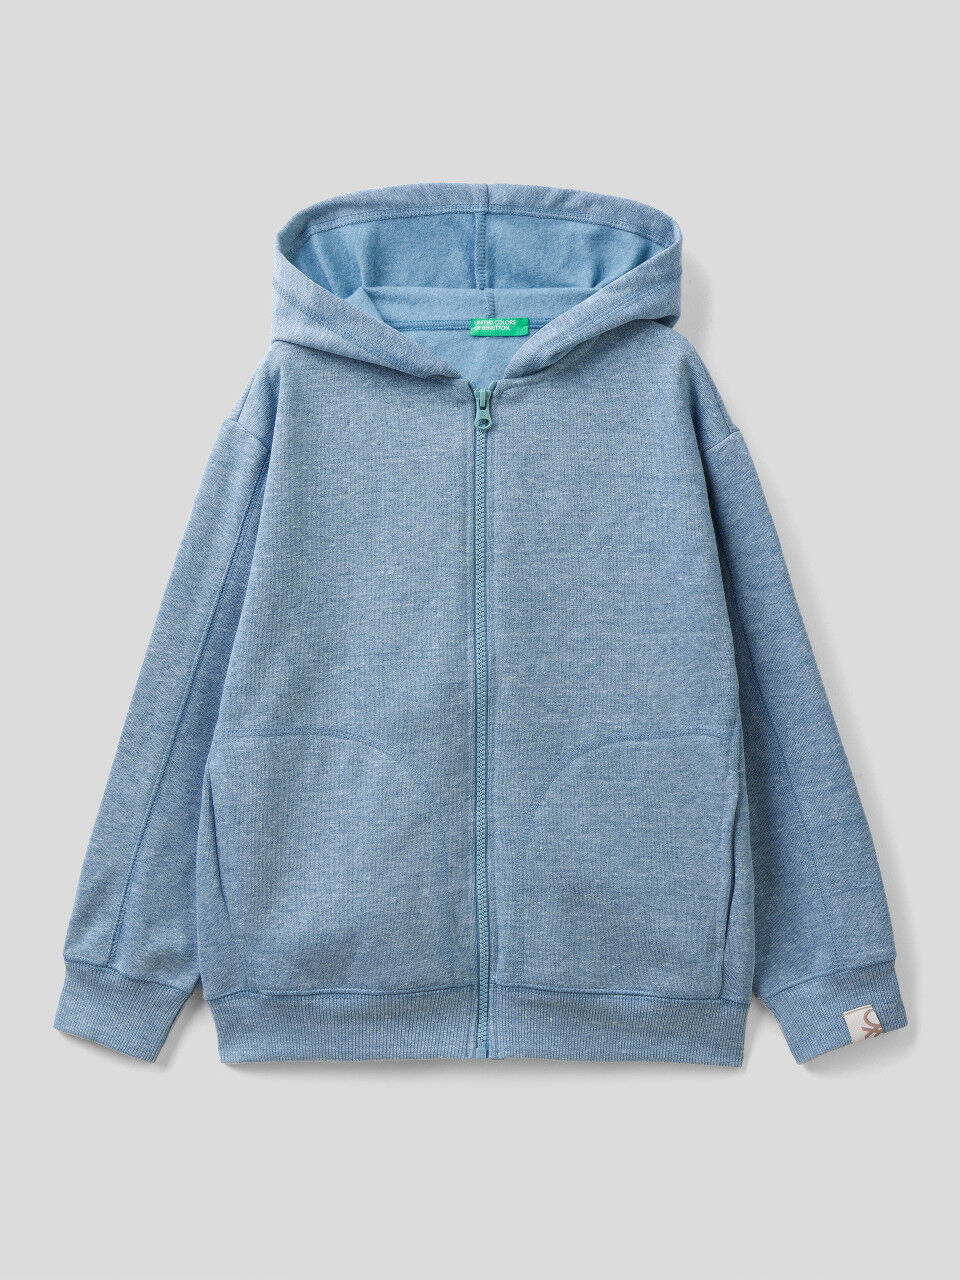 Hoodie in recycled fabric